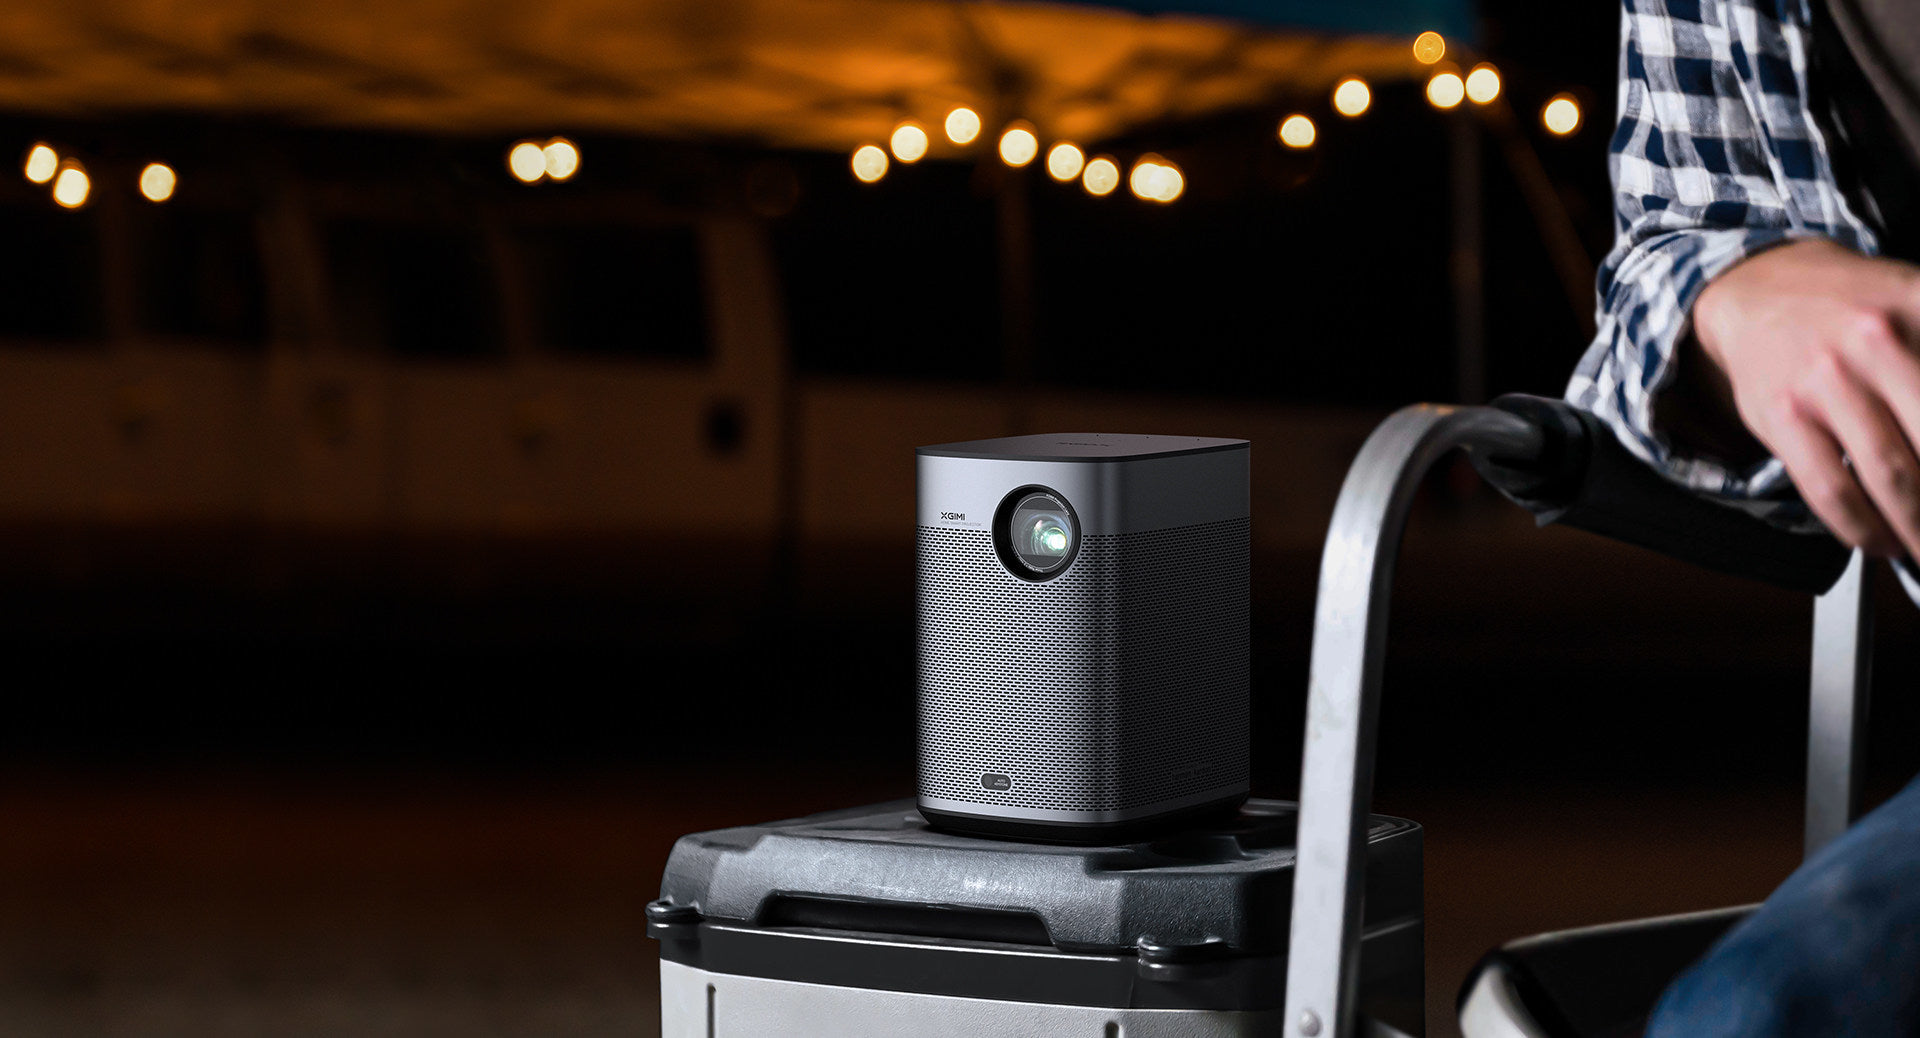 Stream to your heart's content while in between your outdoor bucket list with Halo+'s onboard battery, movie time is anytime, anywhere this Spring.